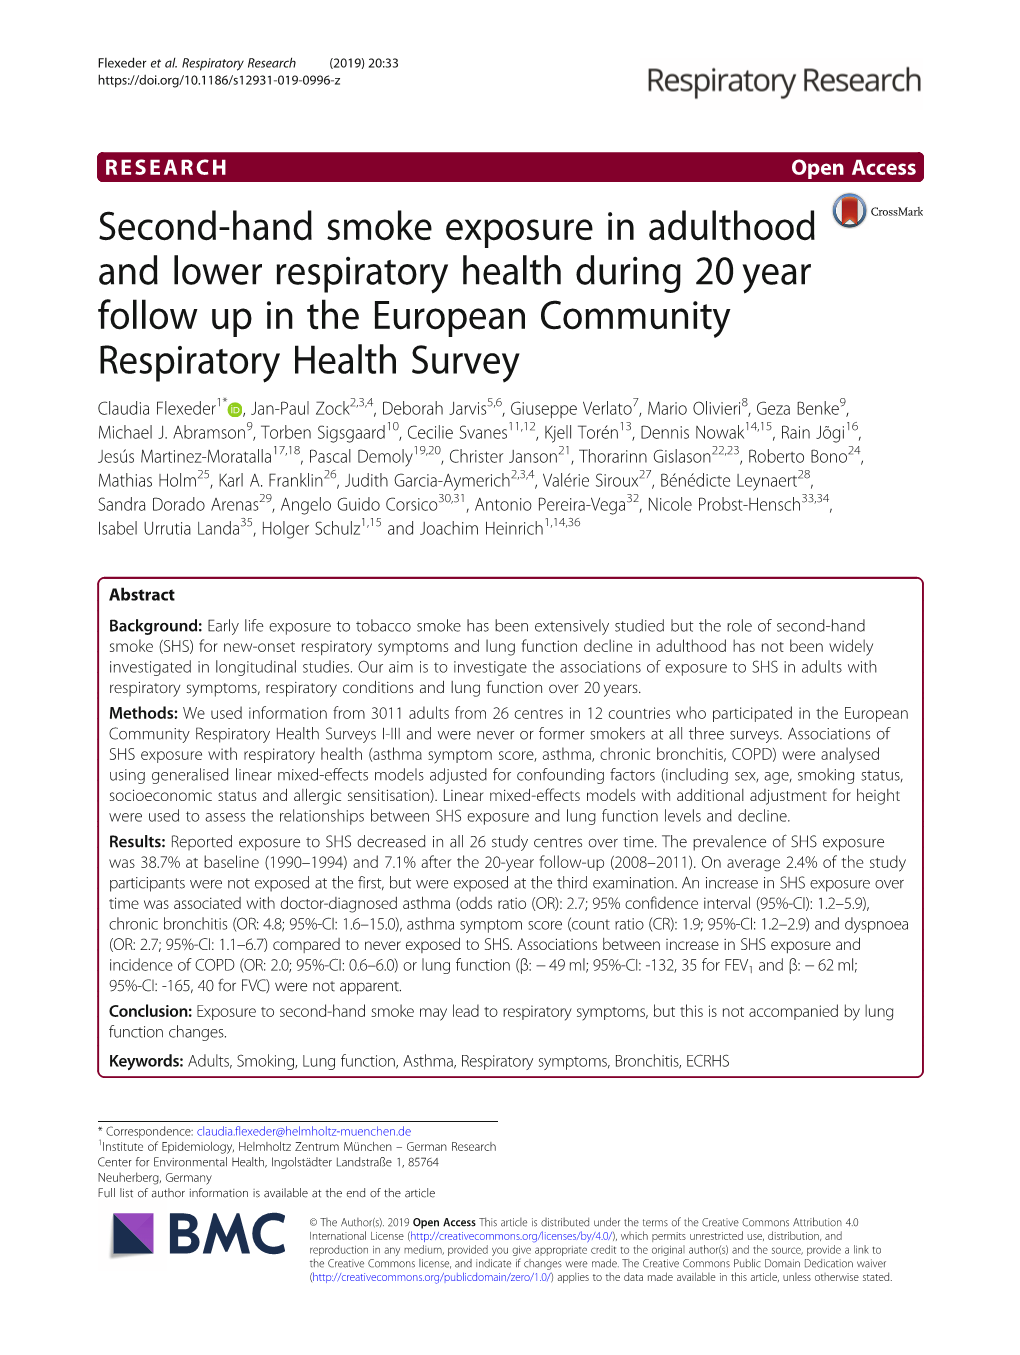 Second-Hand Smoke Exposure in Adulthood And